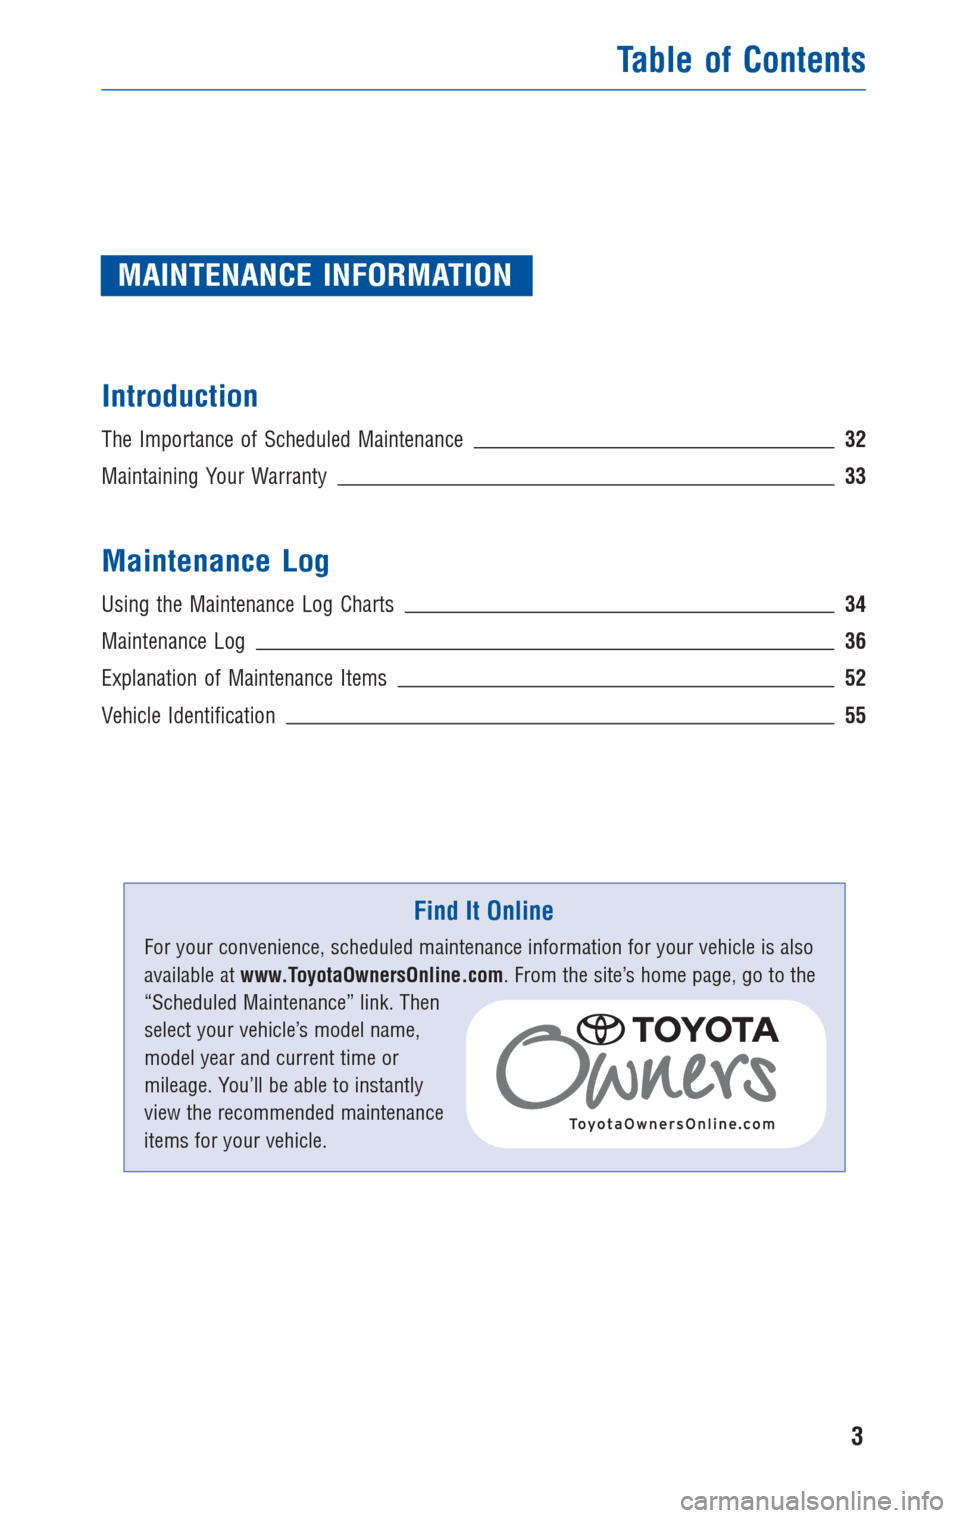 TOYOTA AVALON 2010 XX30 / 3.G Warranty And Maintenance Guide MAINTENANCE INFORMATION
Introduction
The Importance of Scheduled Maintenance32
Maintaining Your Warranty33
Maintenance Log
Using the Maintenance Log Charts34
Maintenance Log36
Explanation of Maintenan